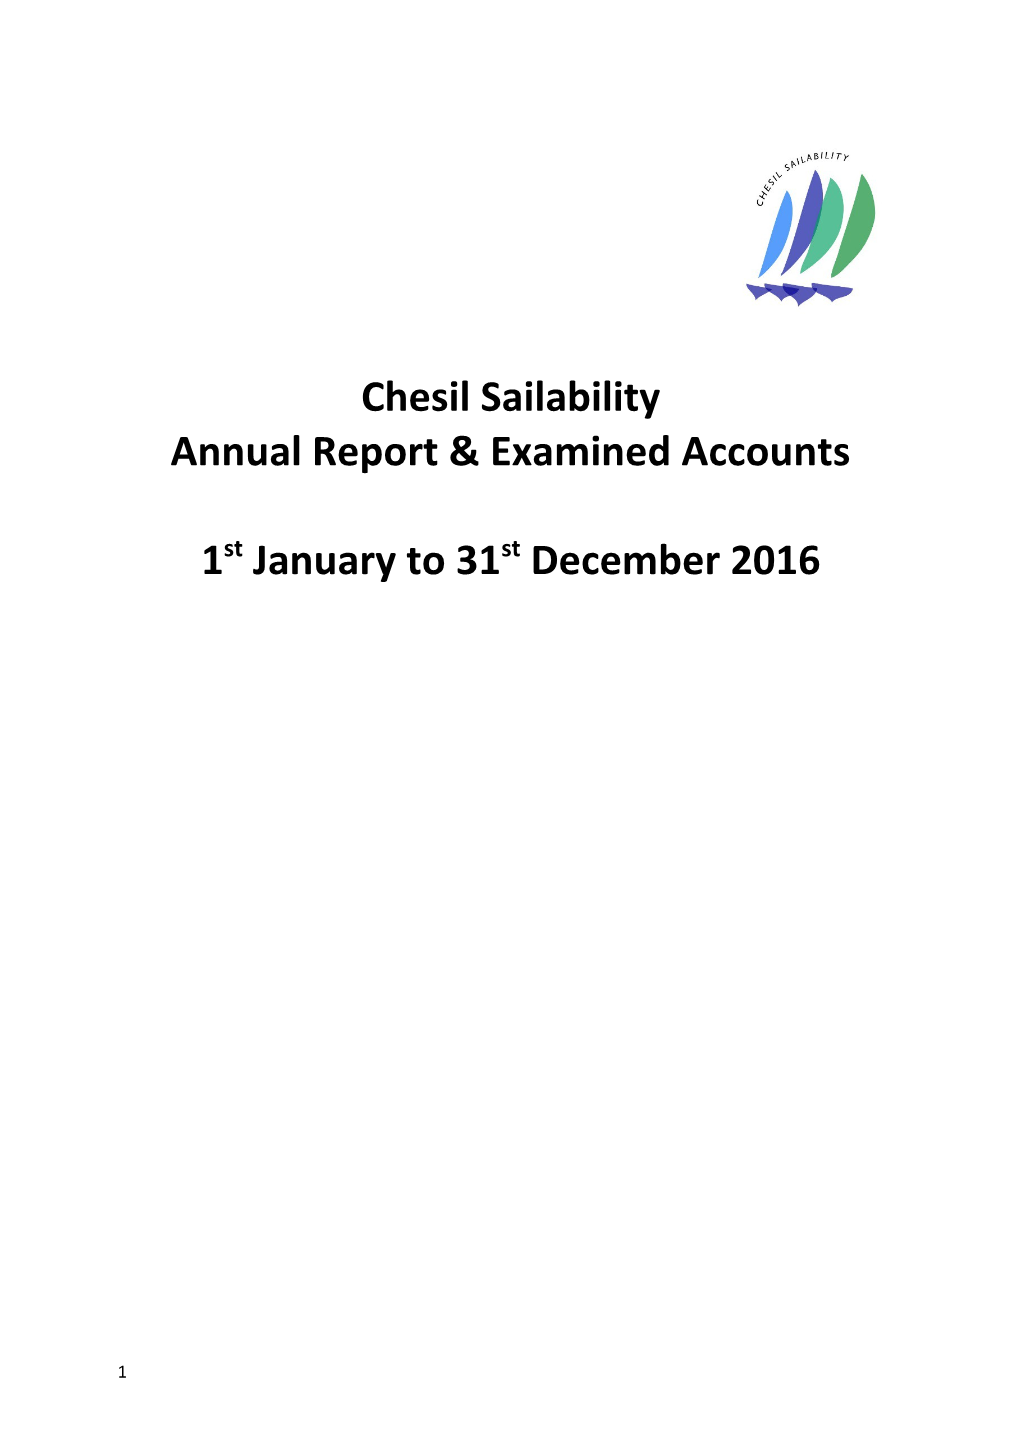 Annual Report & Examined Accounts